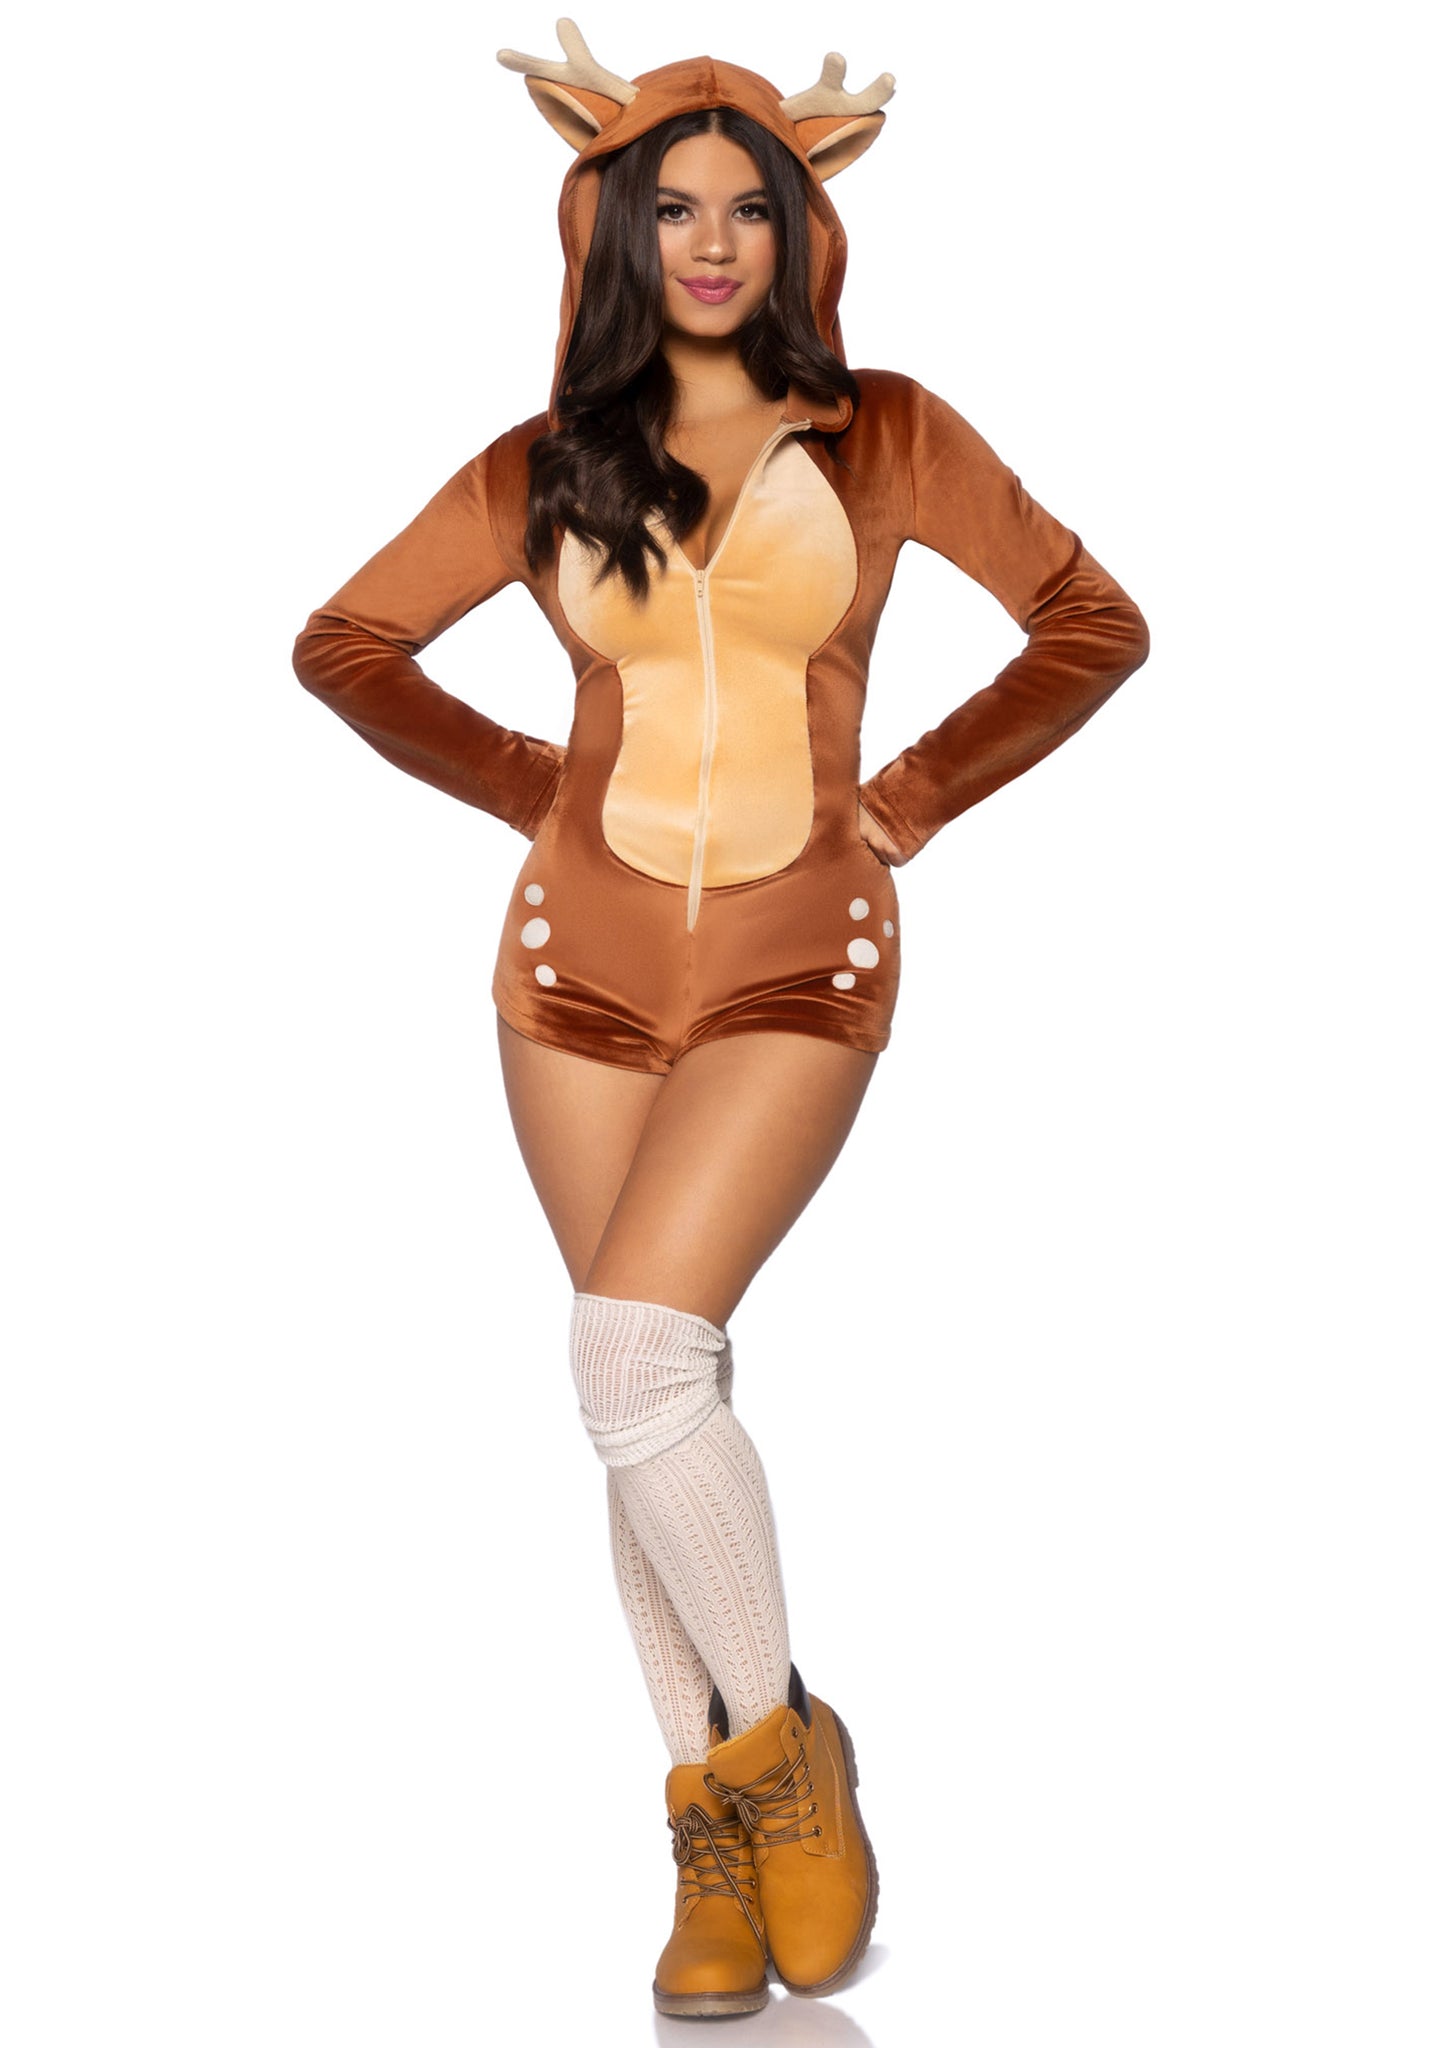 fawn jumpsuit costume for women